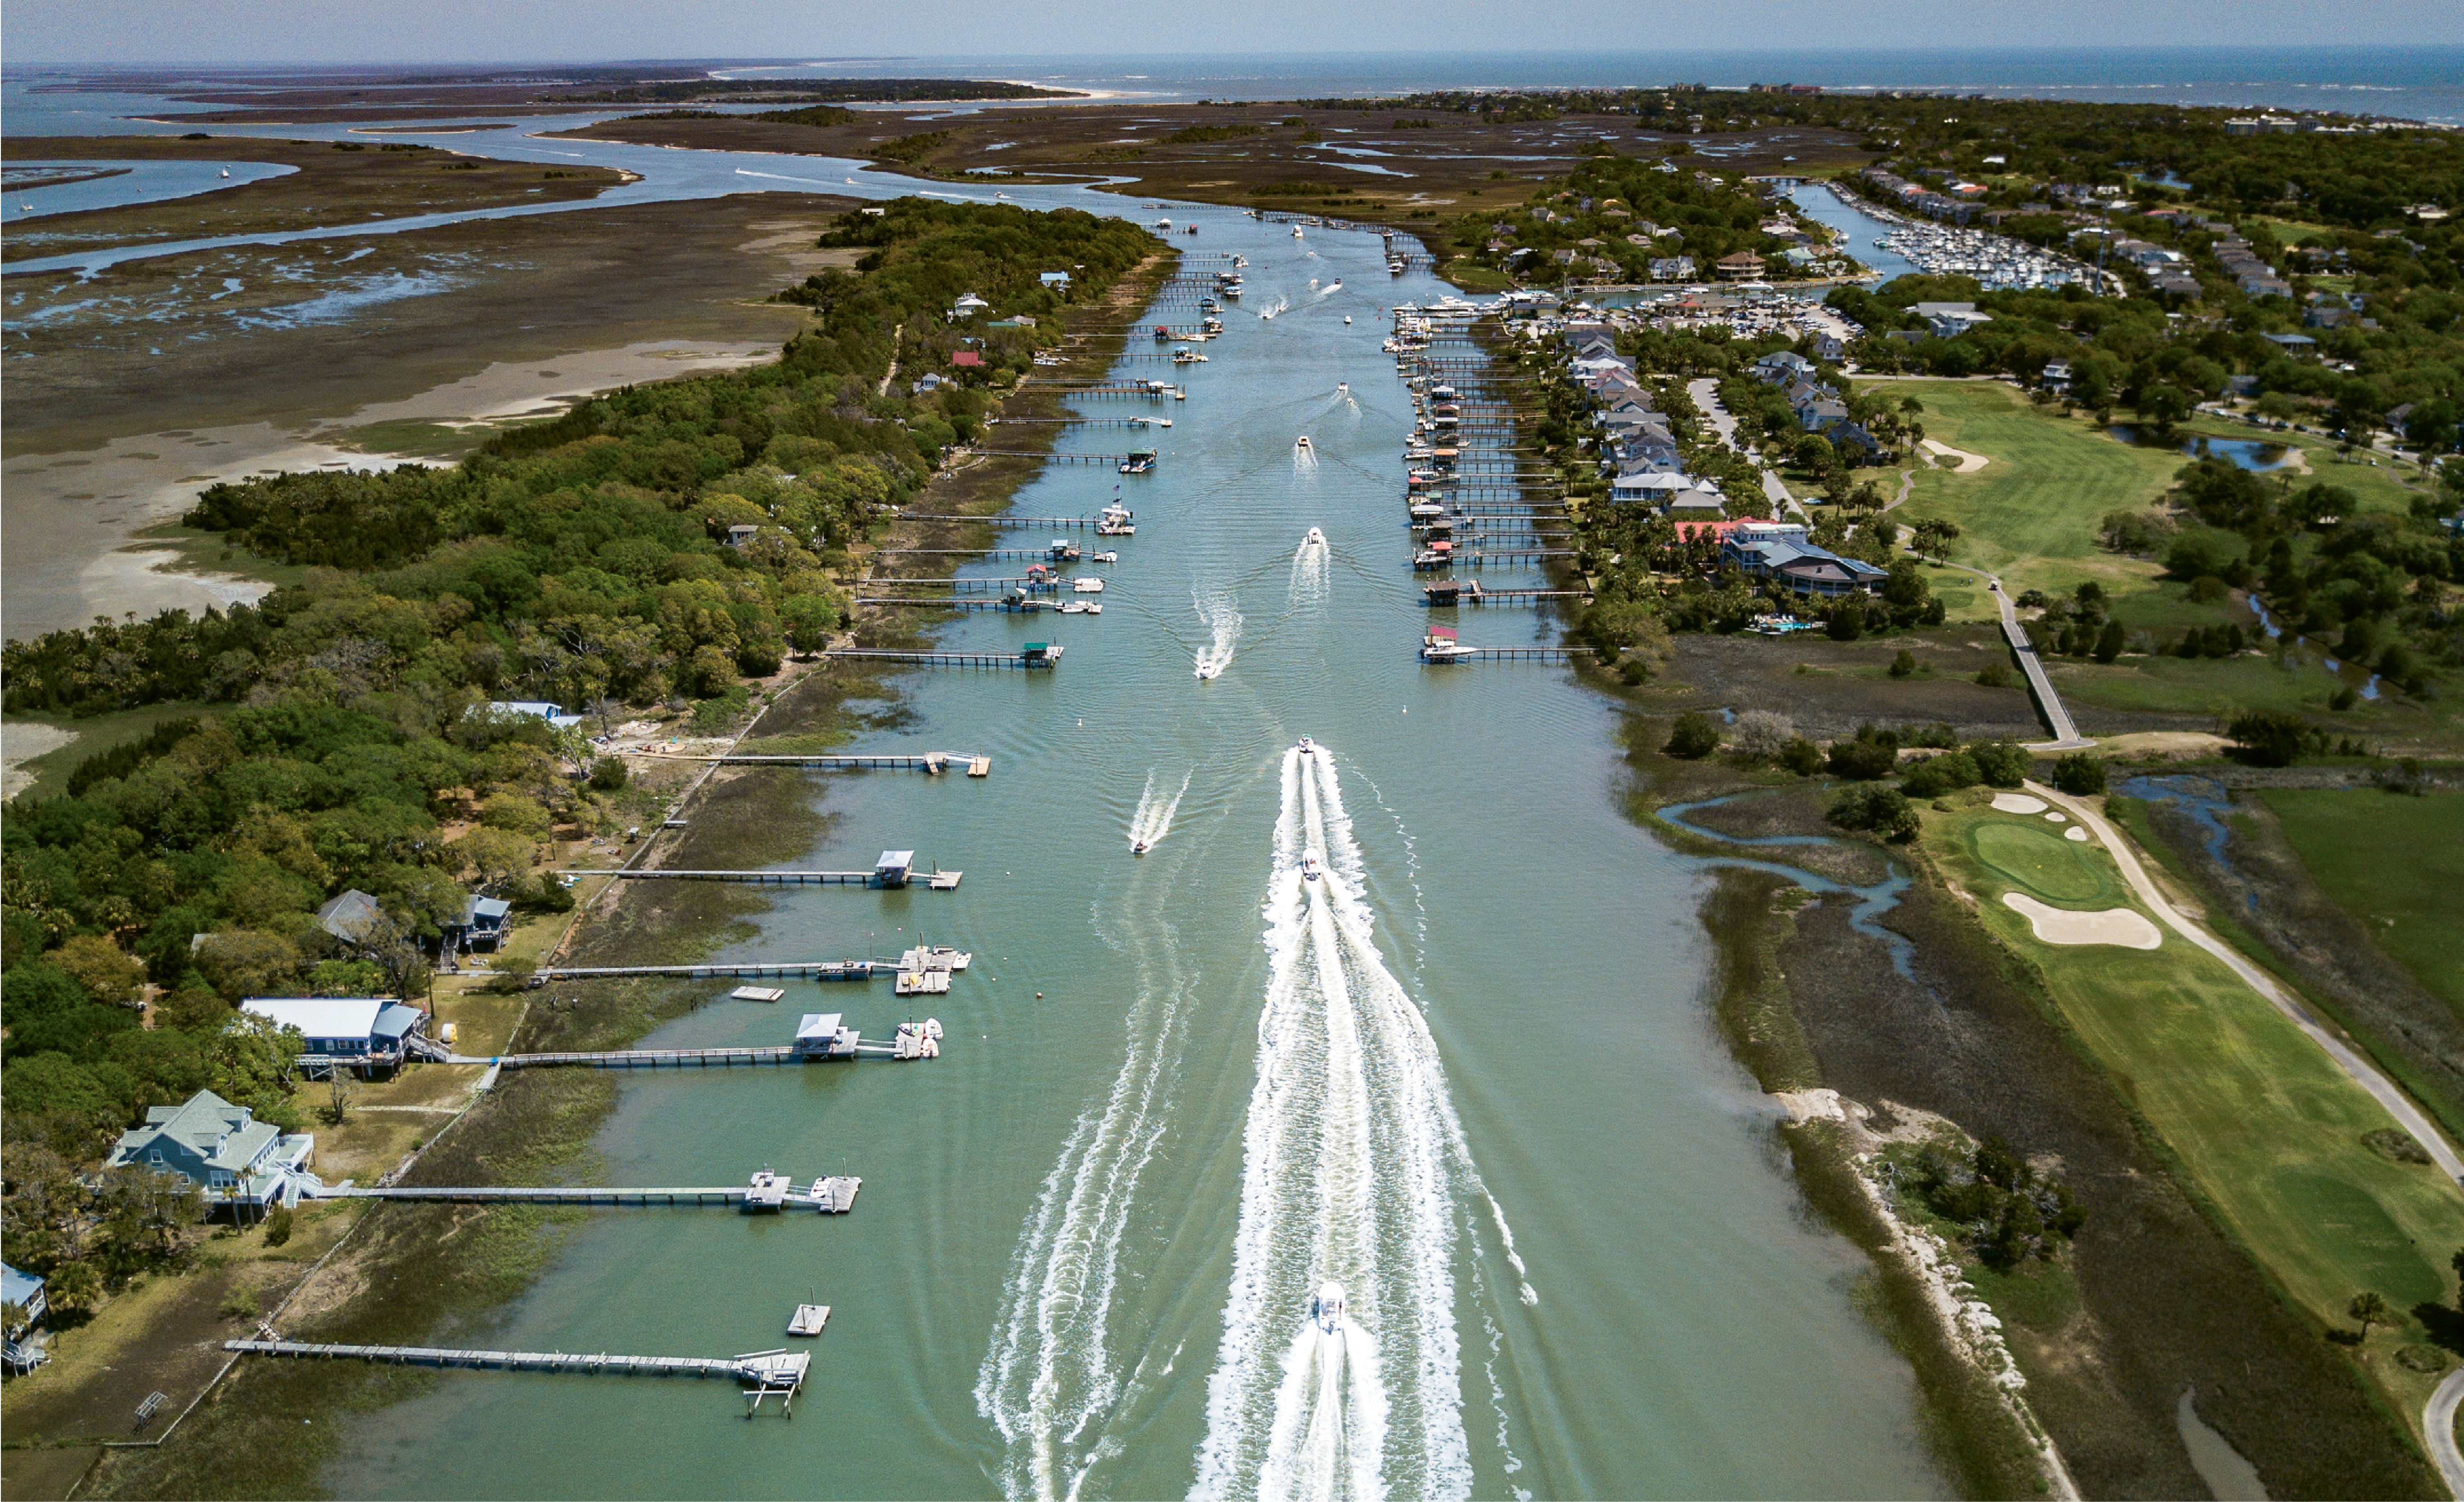 “Easter Weekend Traffic”  {Altitude: 250 feet}  A parade of boats motoring down the Intracoastal Waterway near Isle of Palms